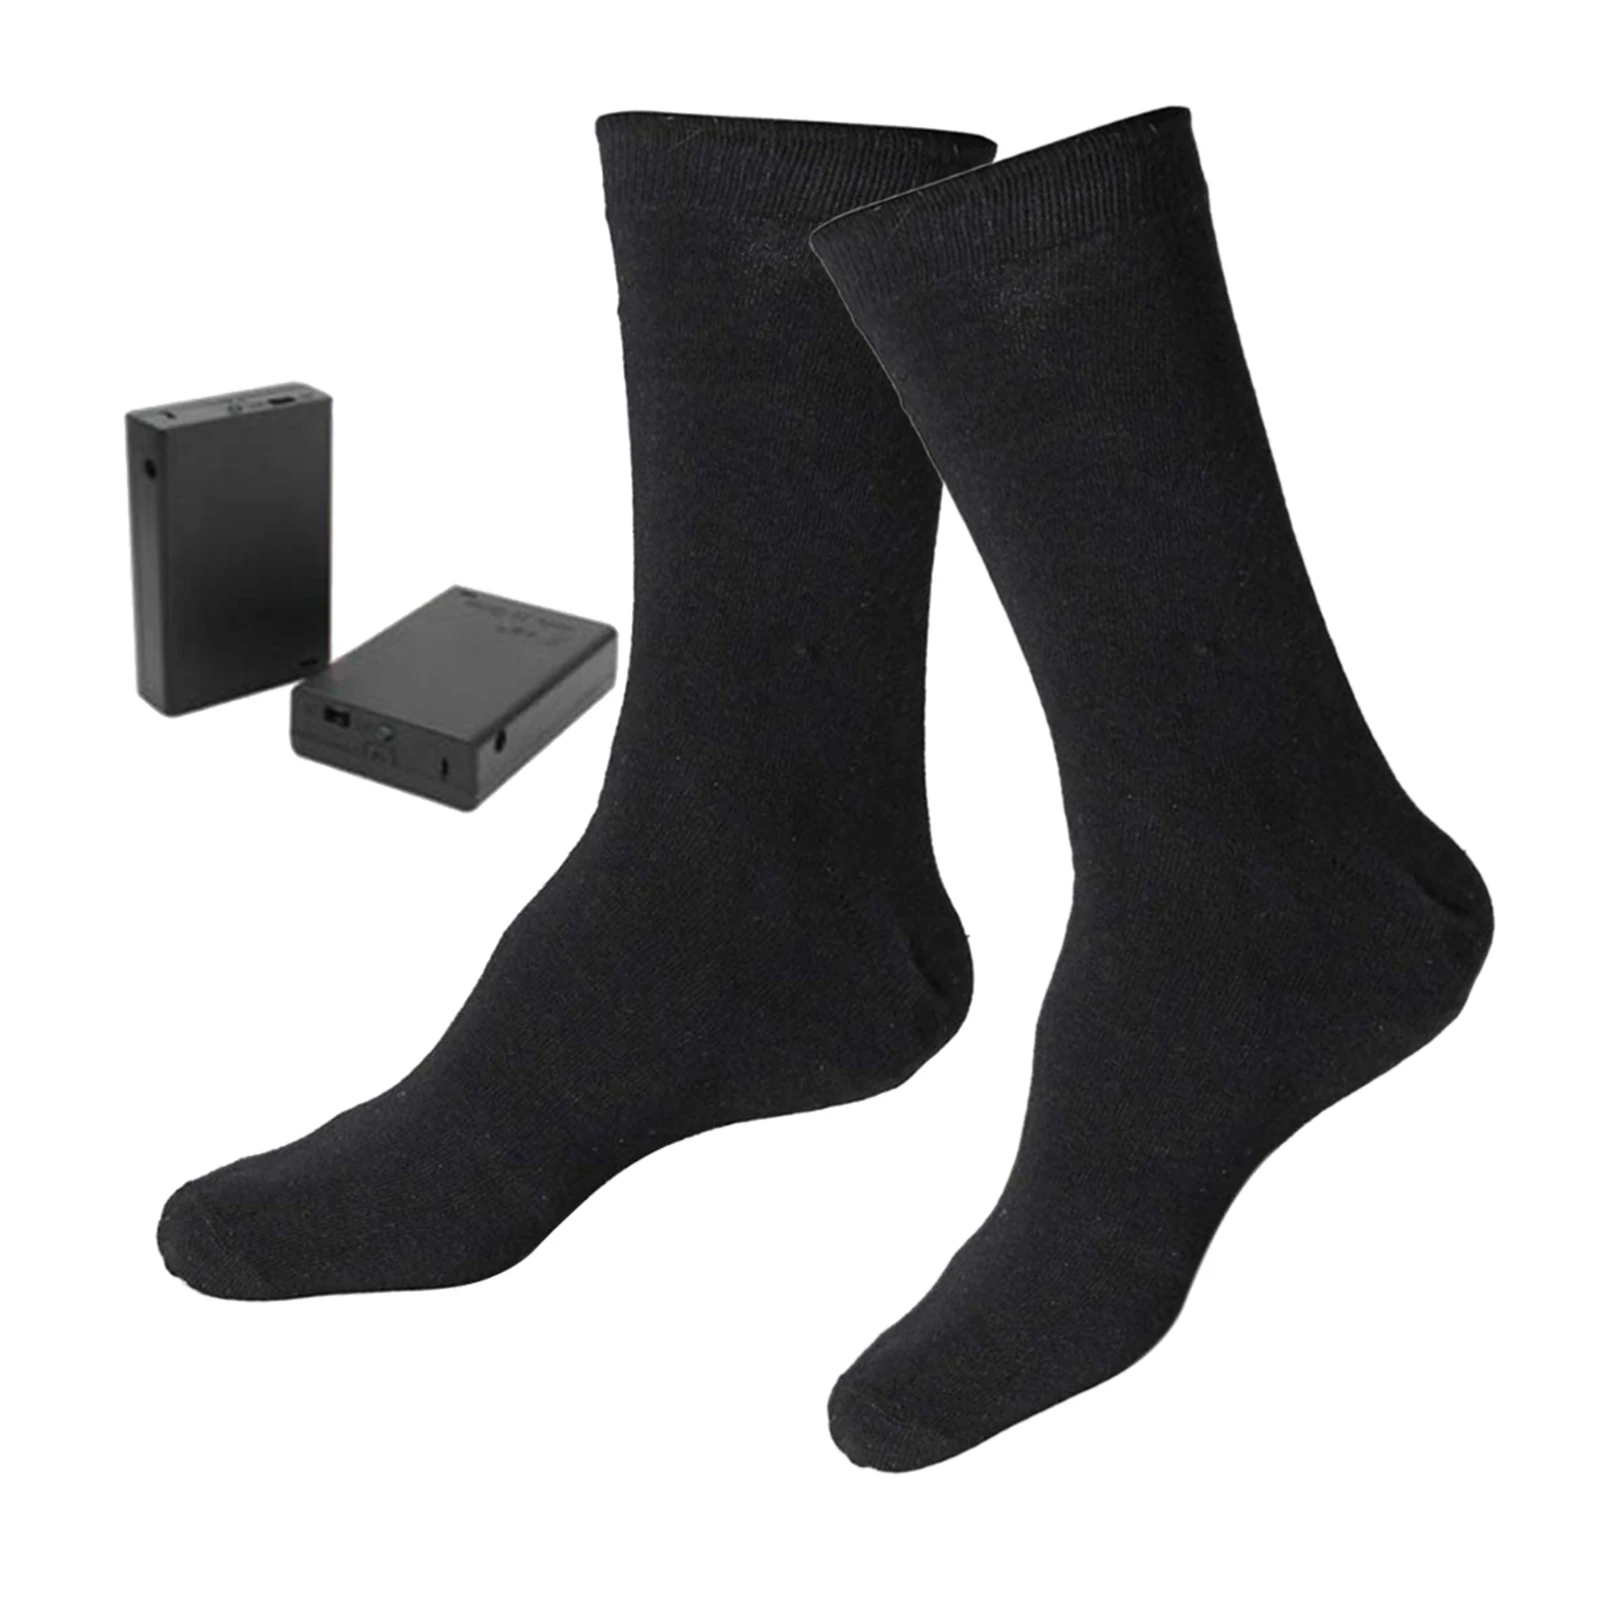 Heated Socks for Men Women - Rechargeable Battery 4.5V Electric Socks with Large